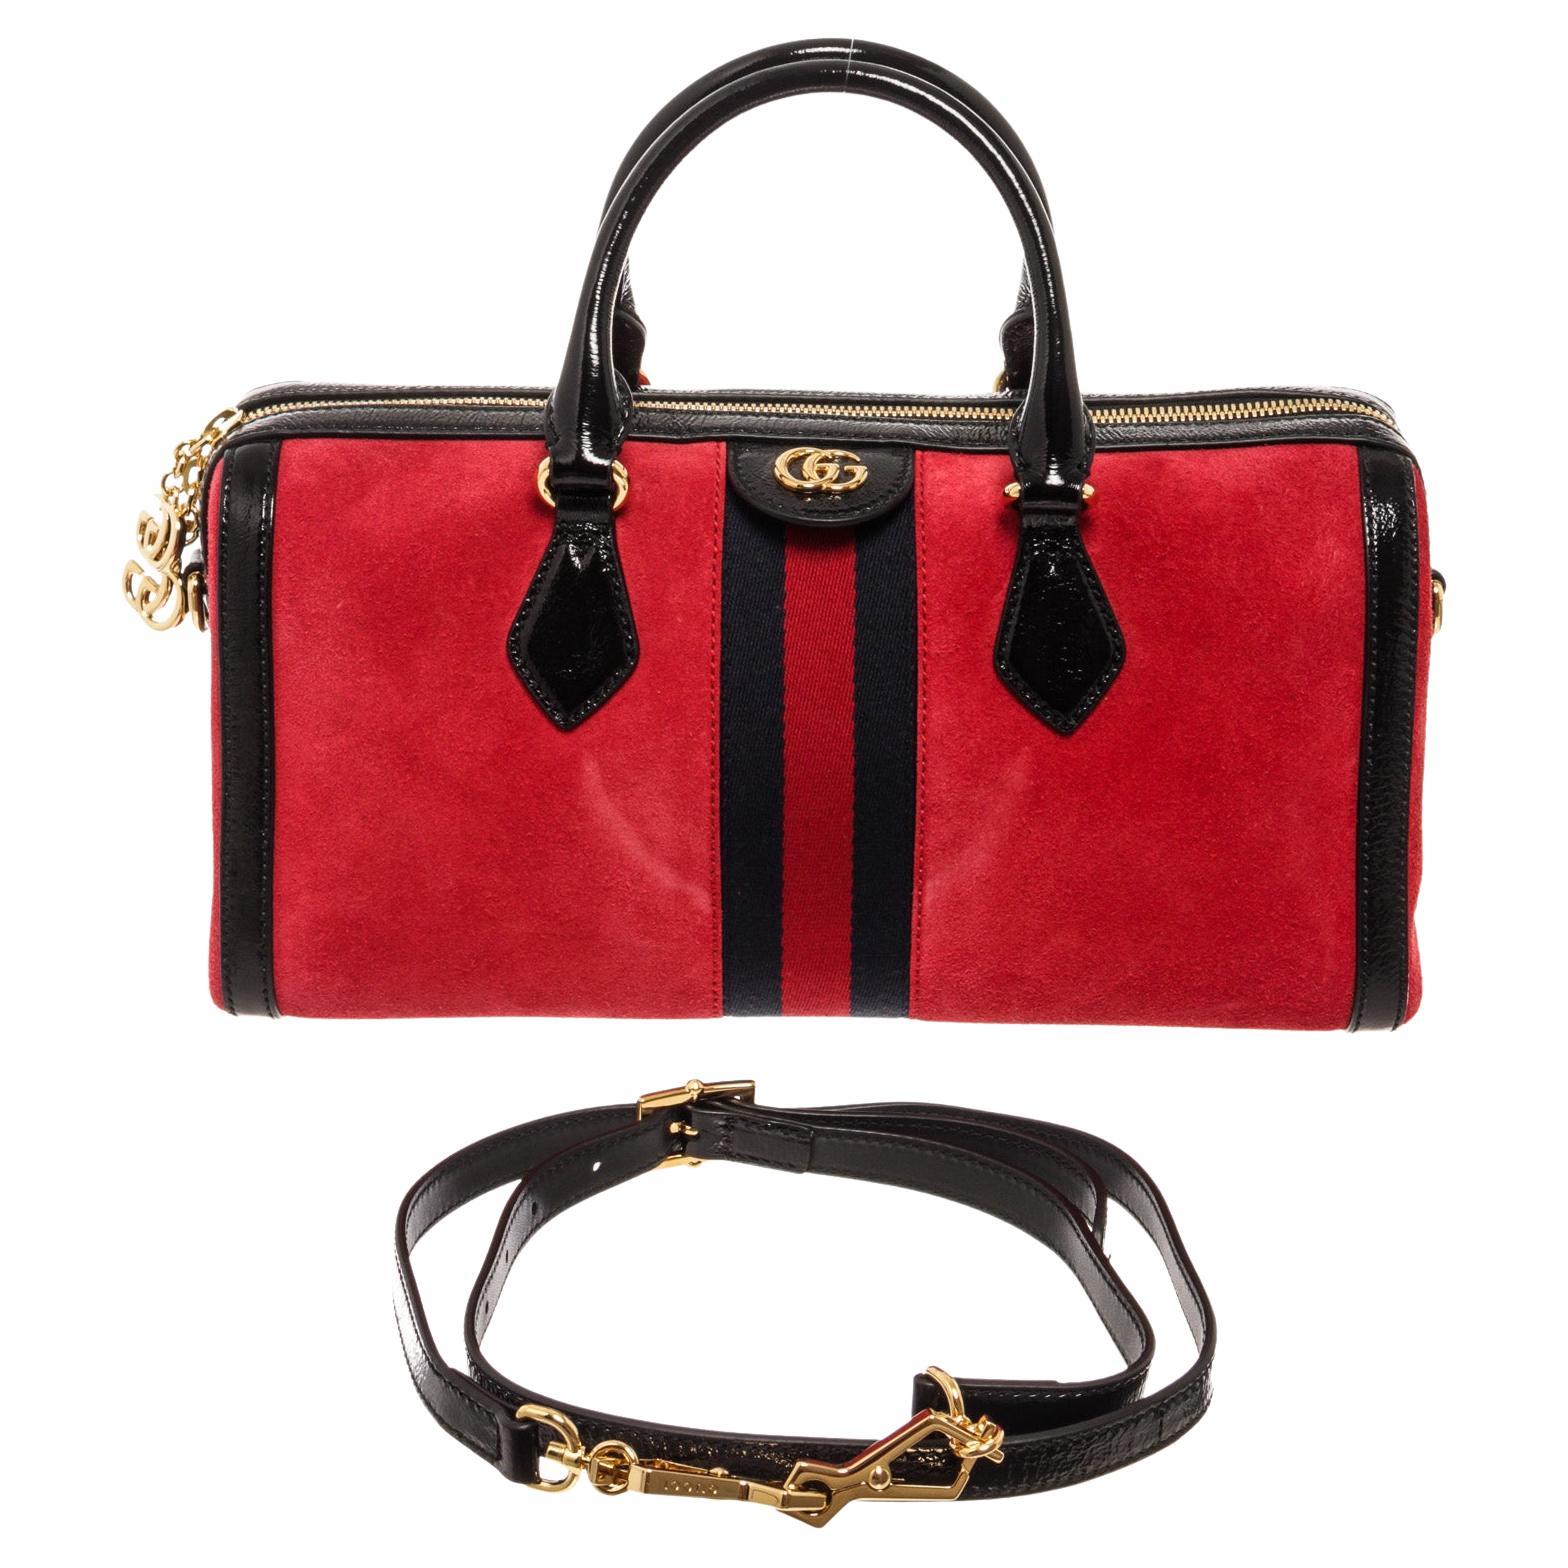 Gucci Red Suede Black Leather Ophidia Medium Boston Handbag For Sale